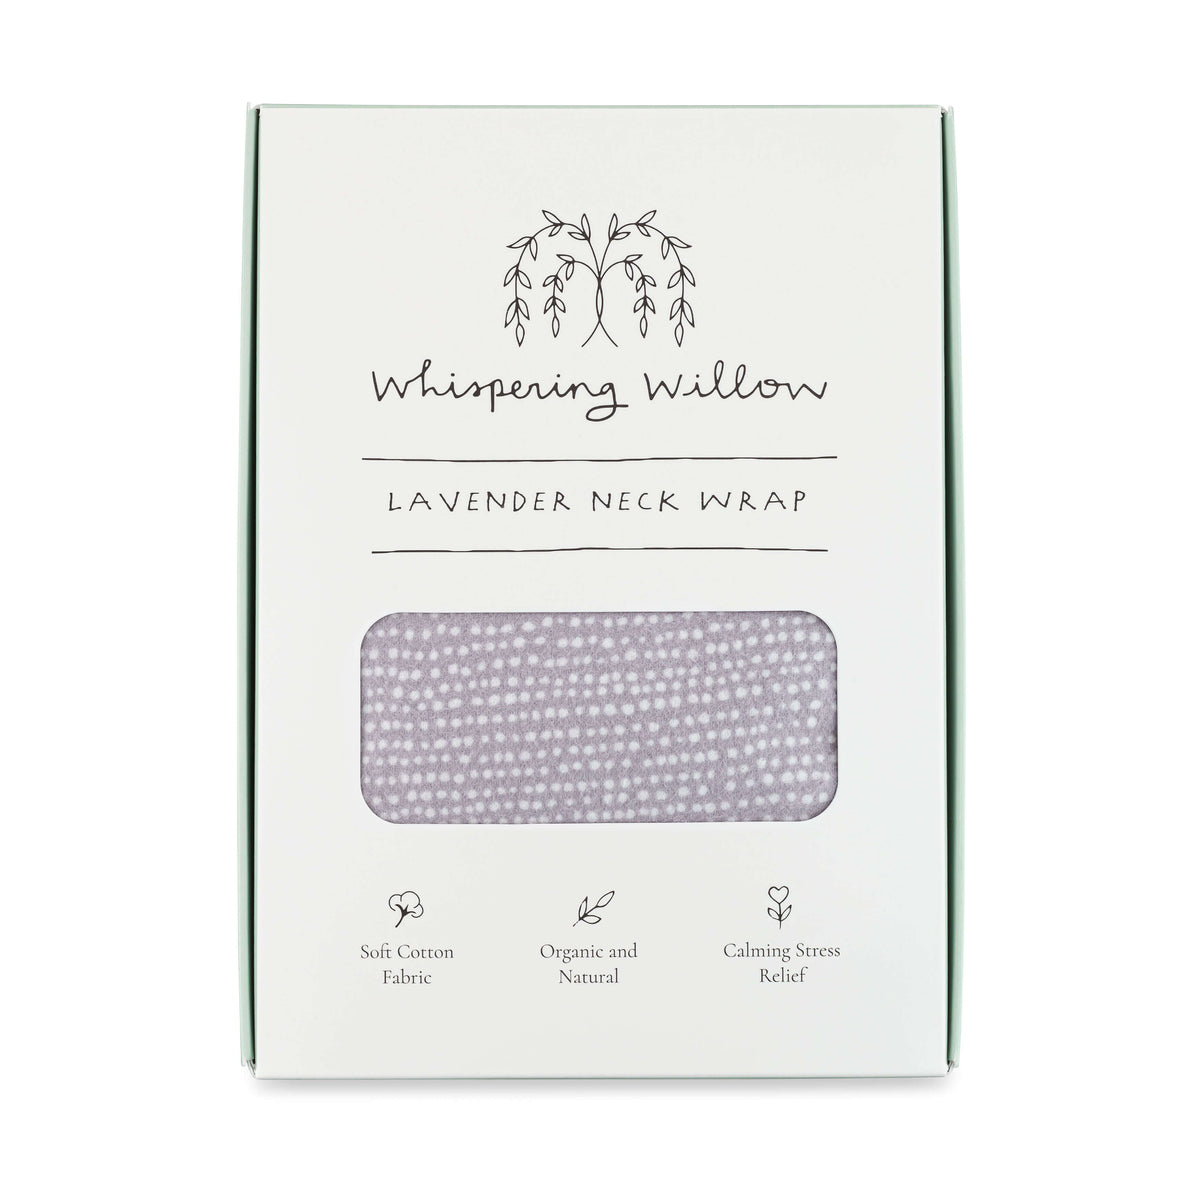 Whispering Willow Lavender Neck Wrap